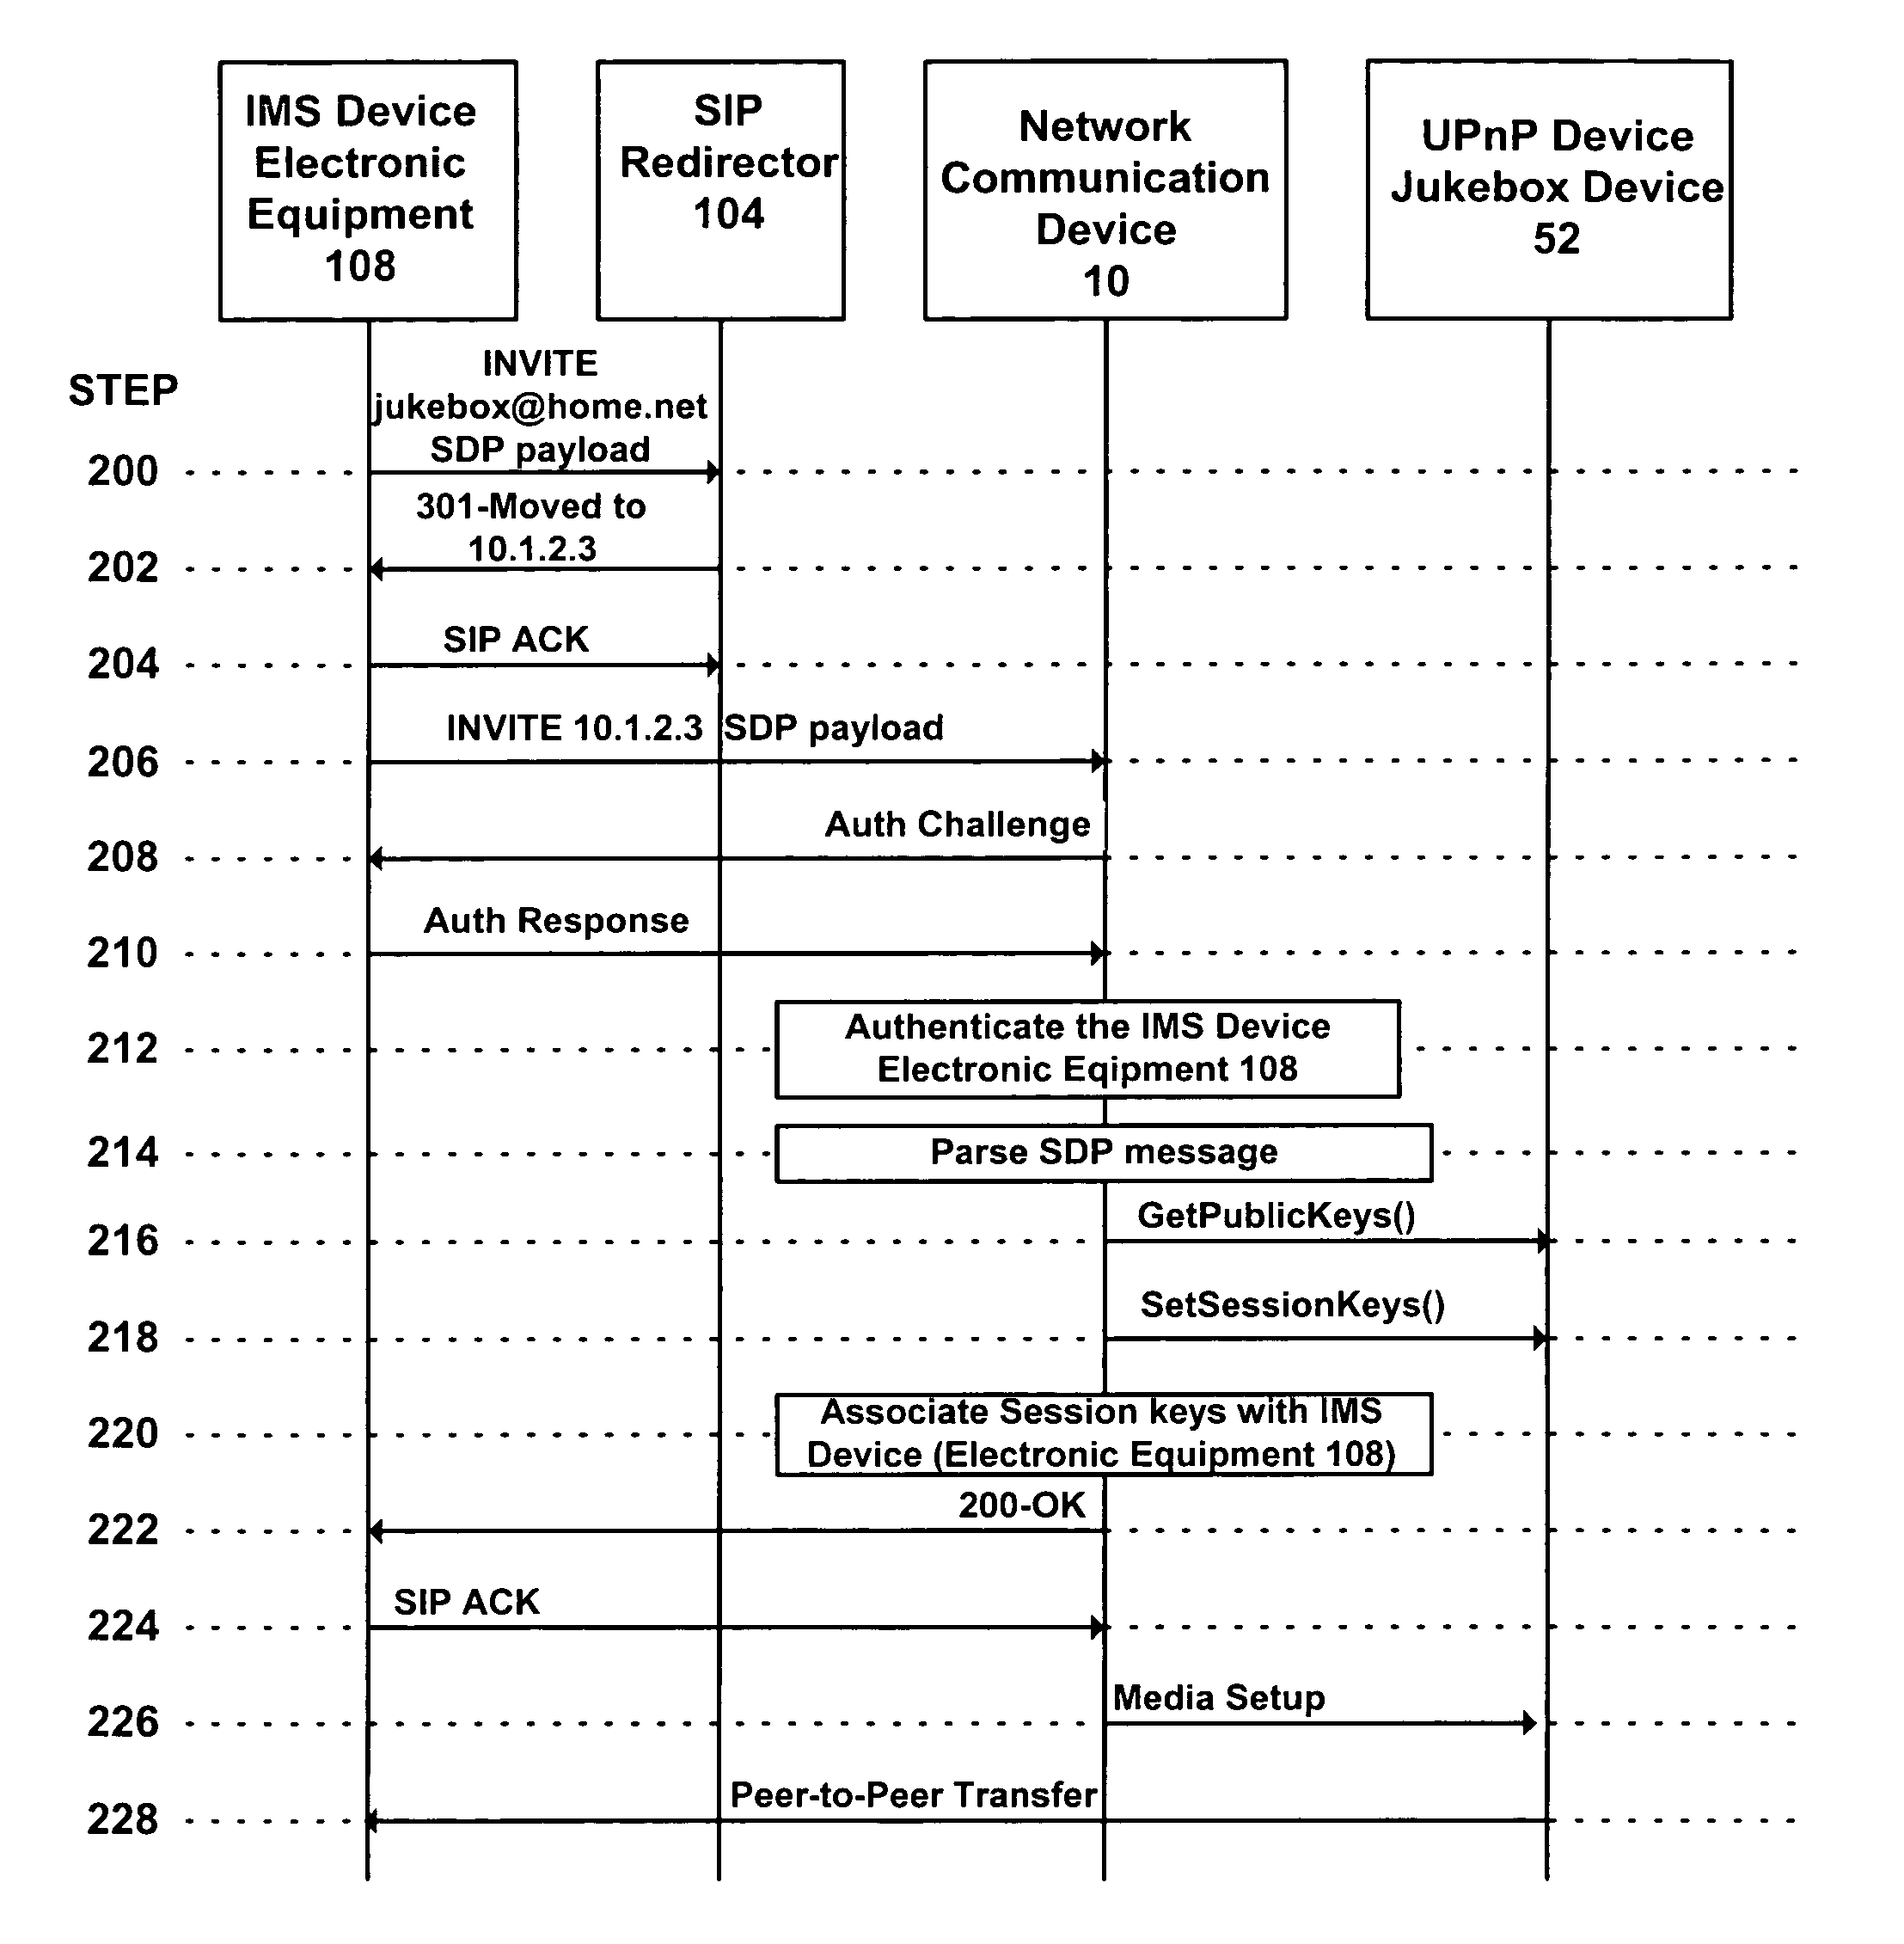 Network communication device for universal plug and play and internet multimedia subsystems networks